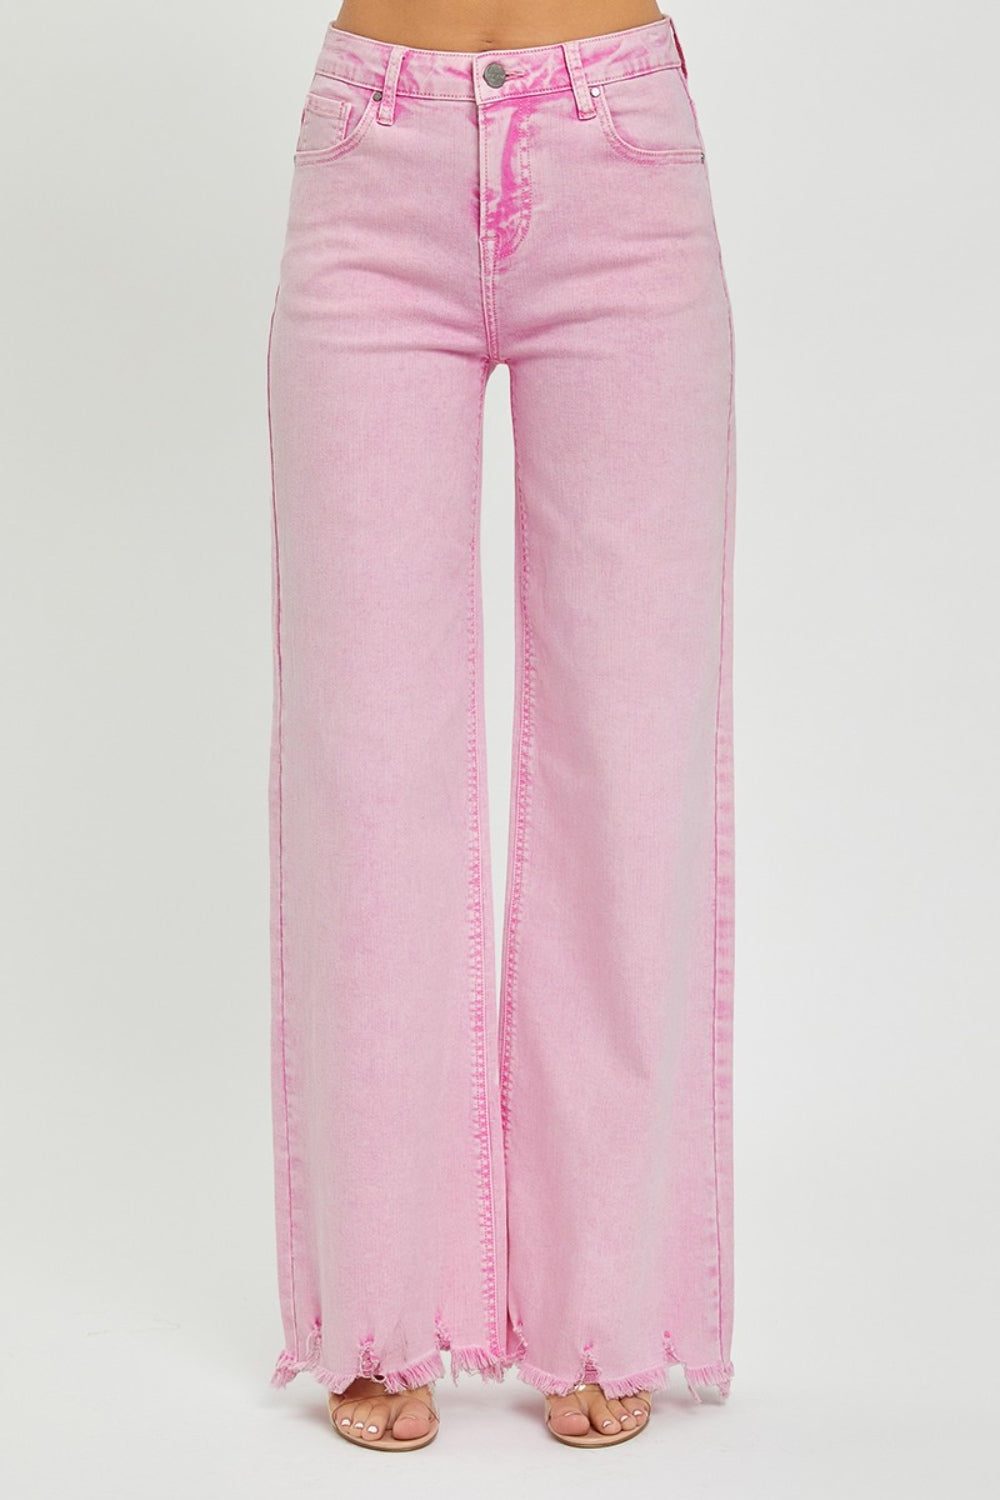 Pink Acid Wide Leg Jeans - Cheeky Chic Boutique